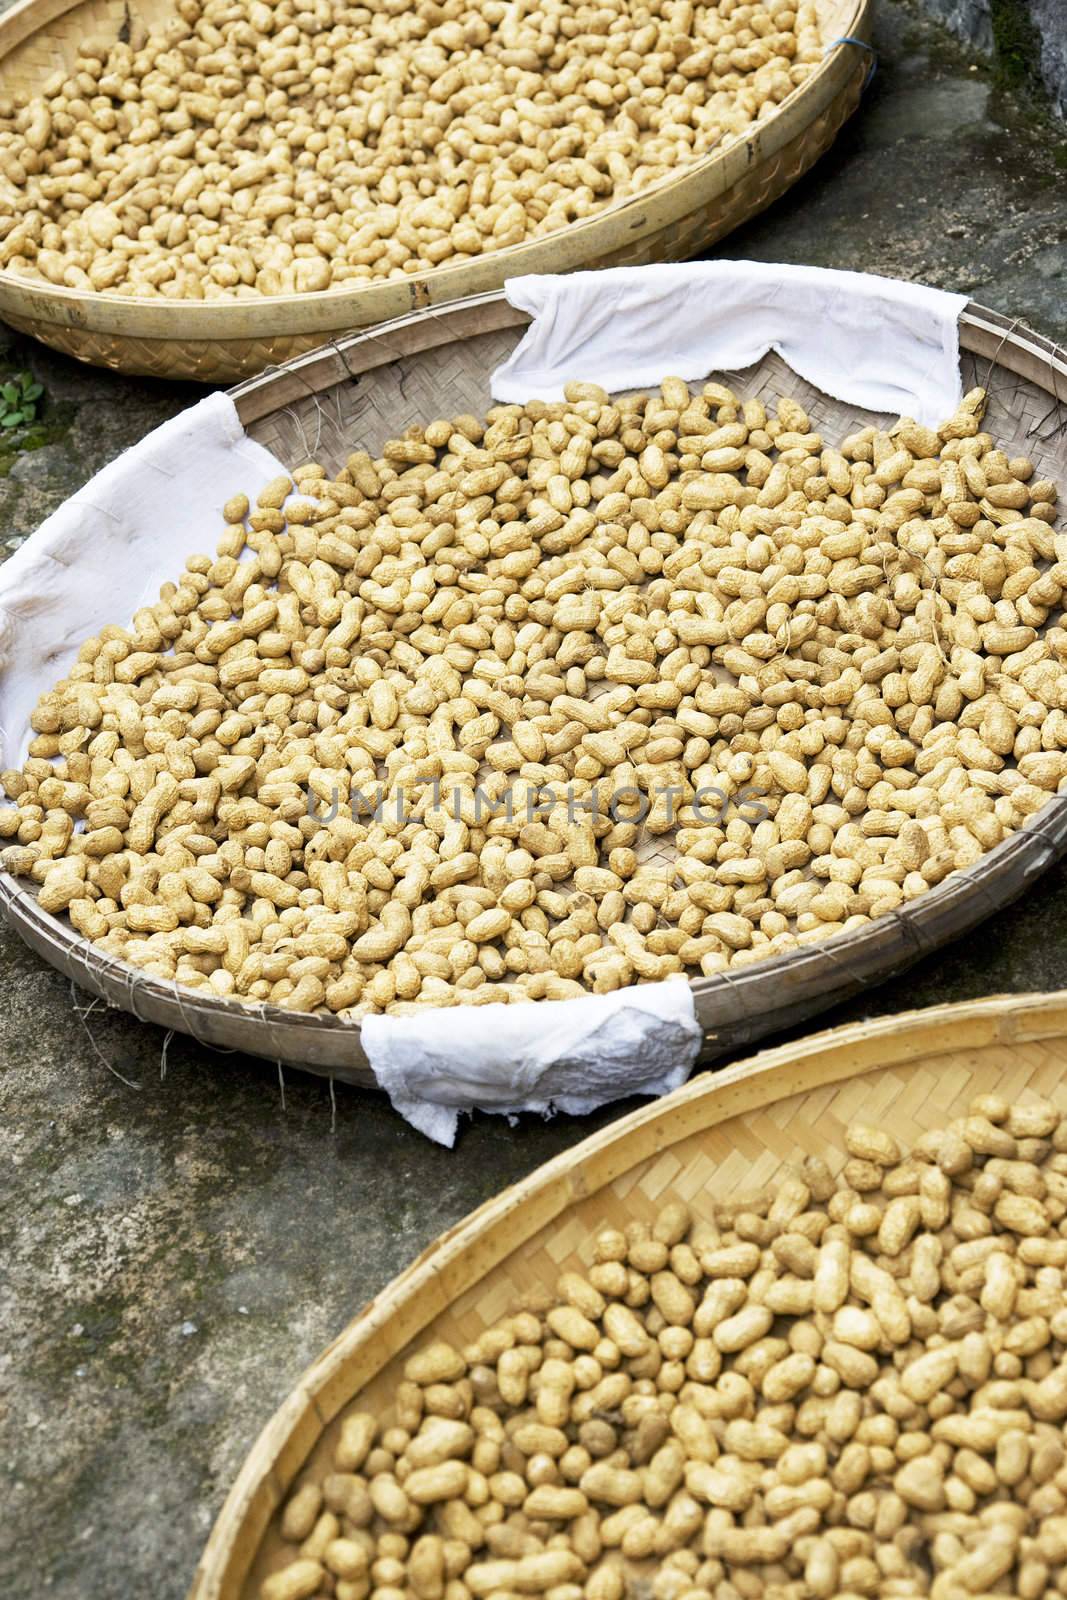 Image of groundnuts being dried at Guilin, China.